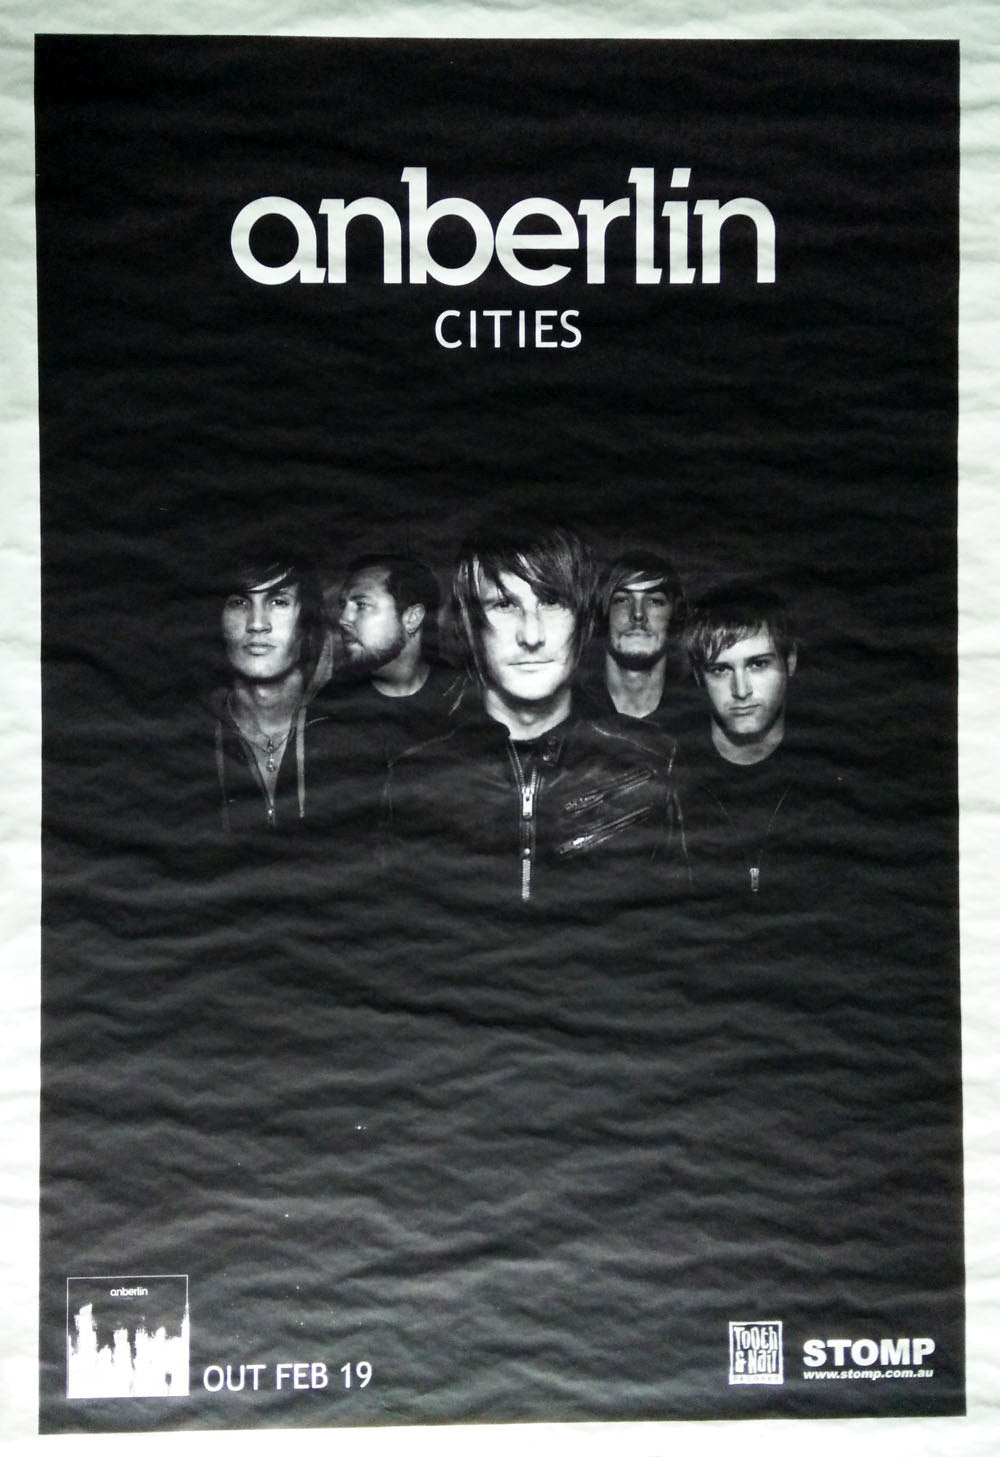 ANBERLIN - Cities 2007 Album Promotional Poster - 1